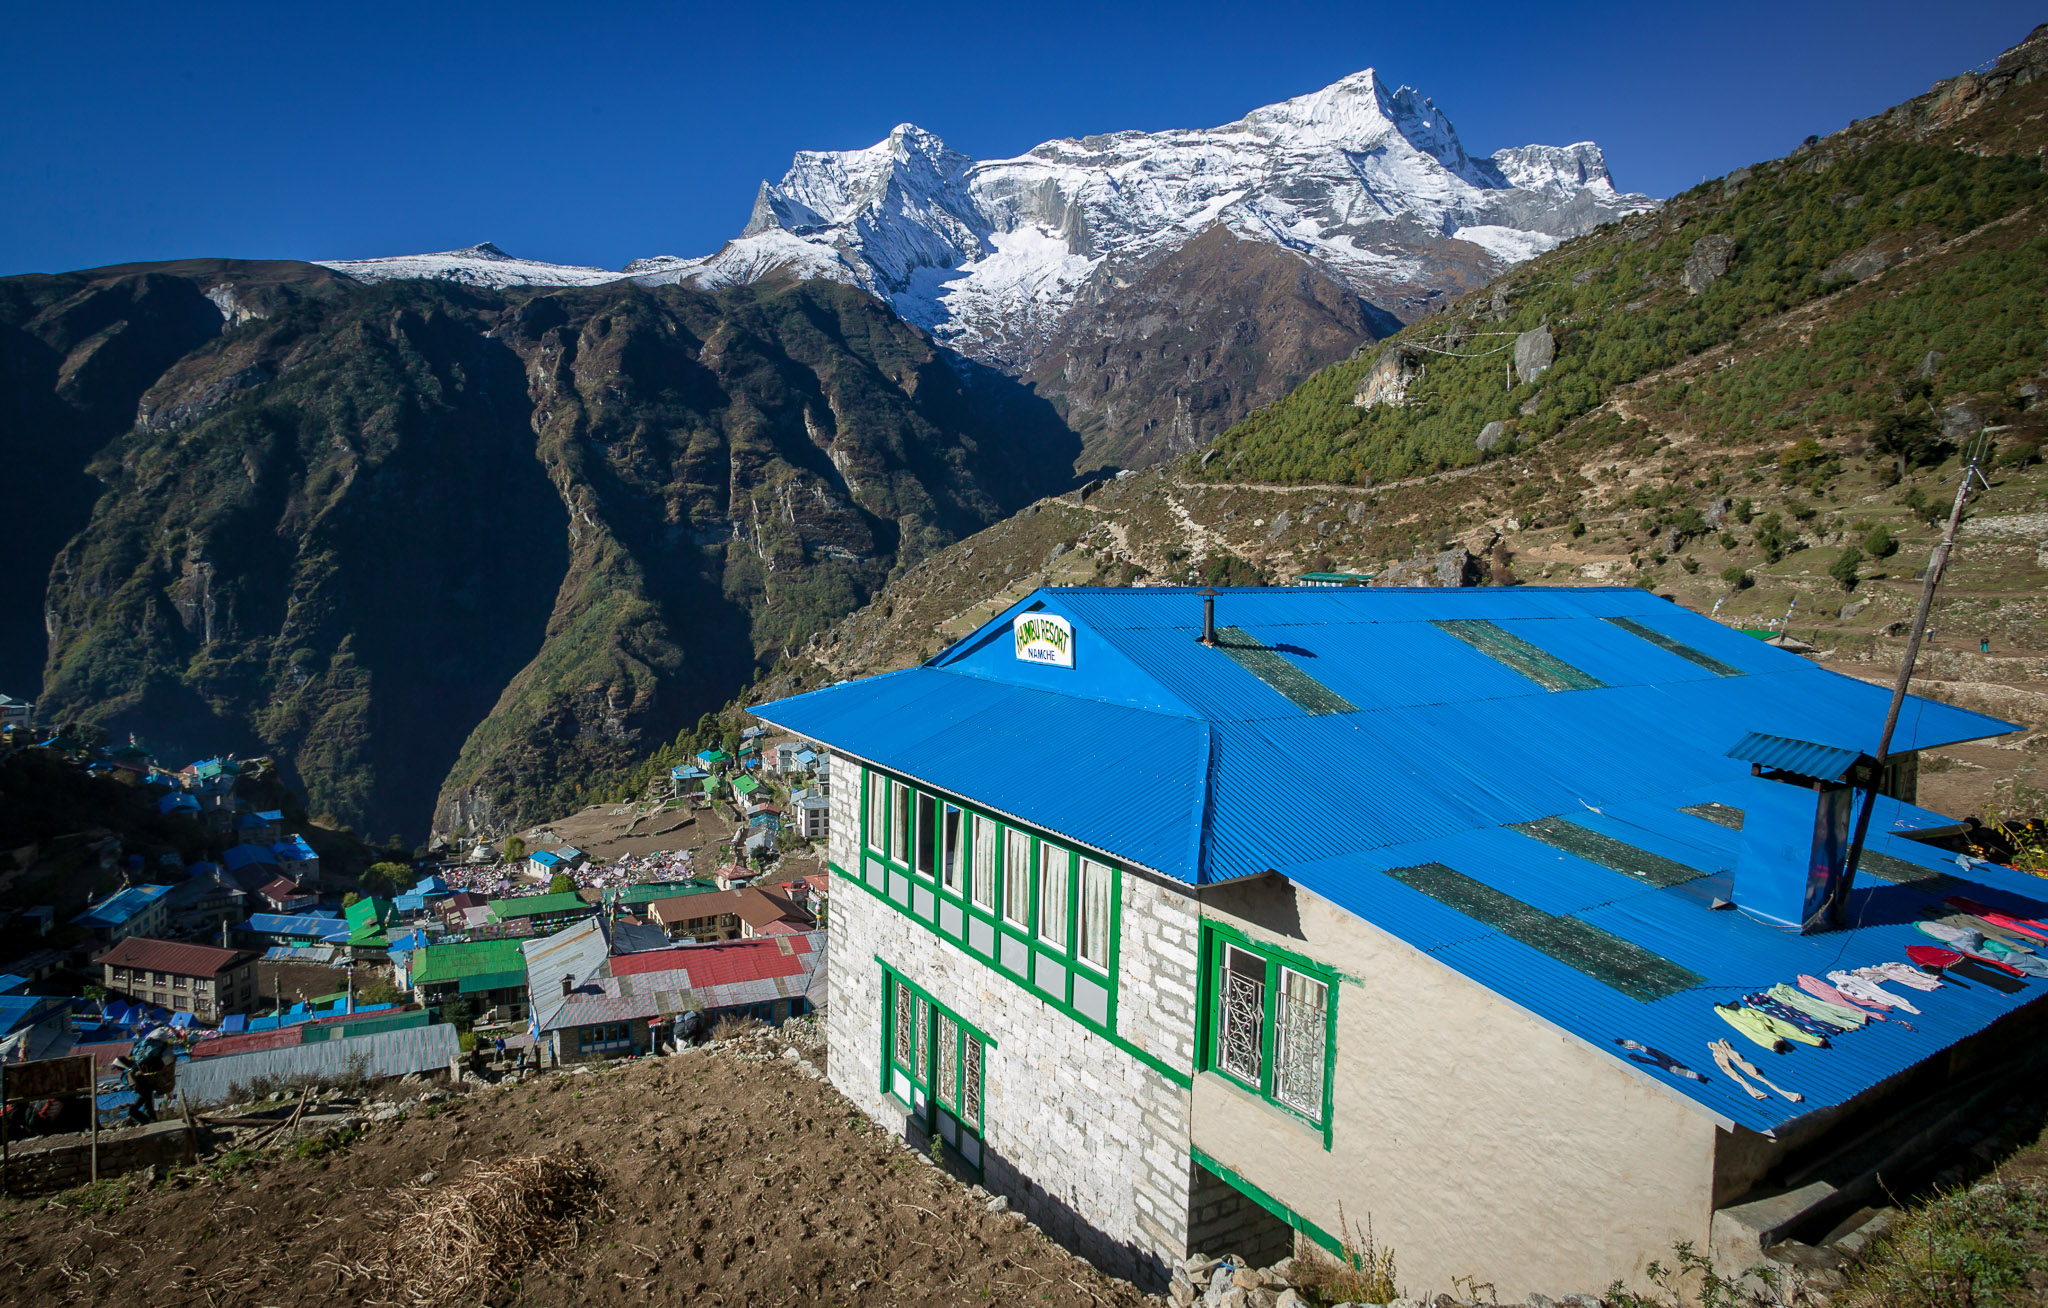 Our Namche lodge